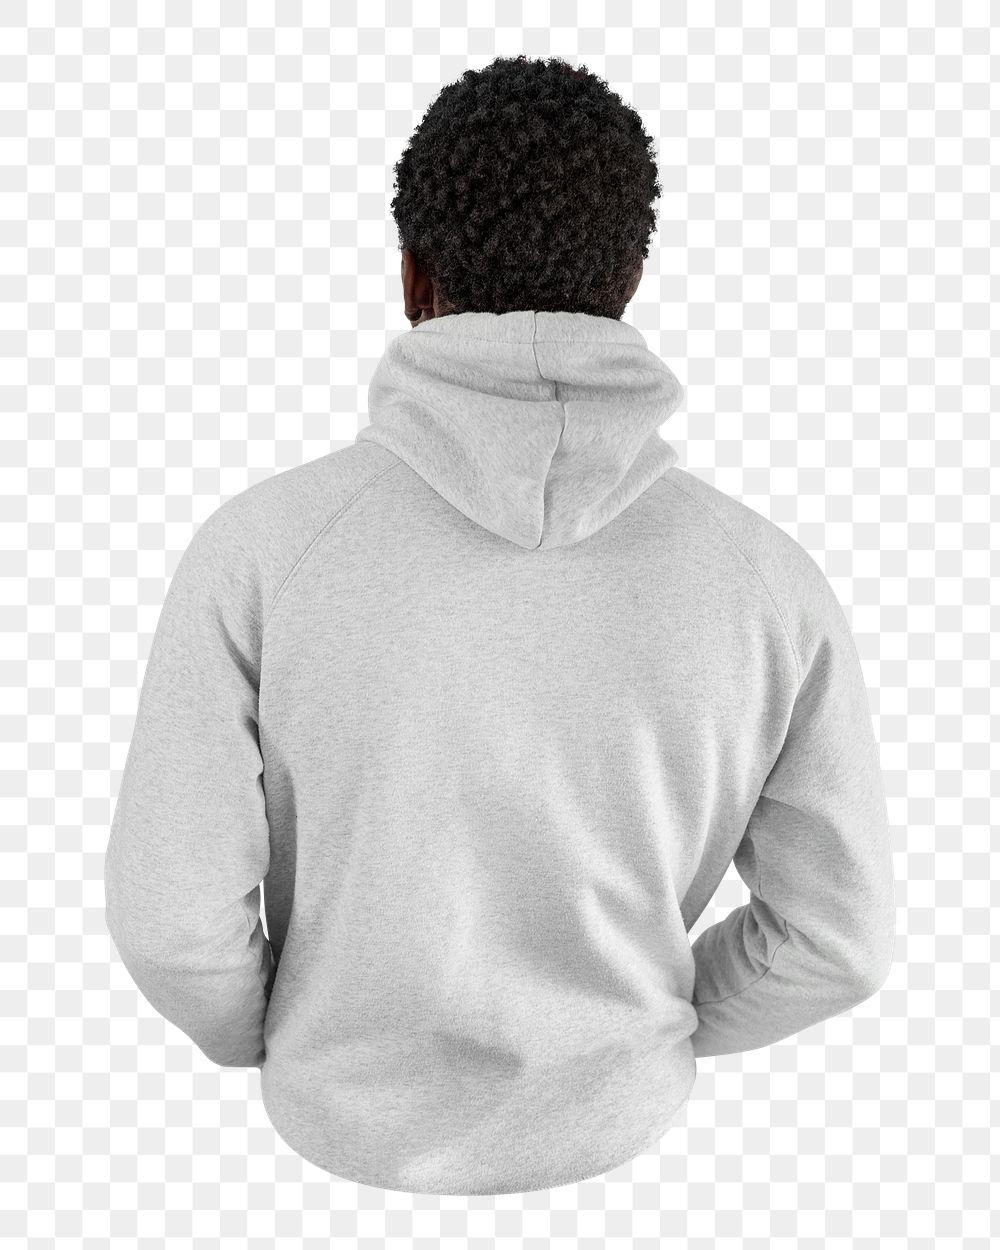 Png hoodie back, African man image on transparent background